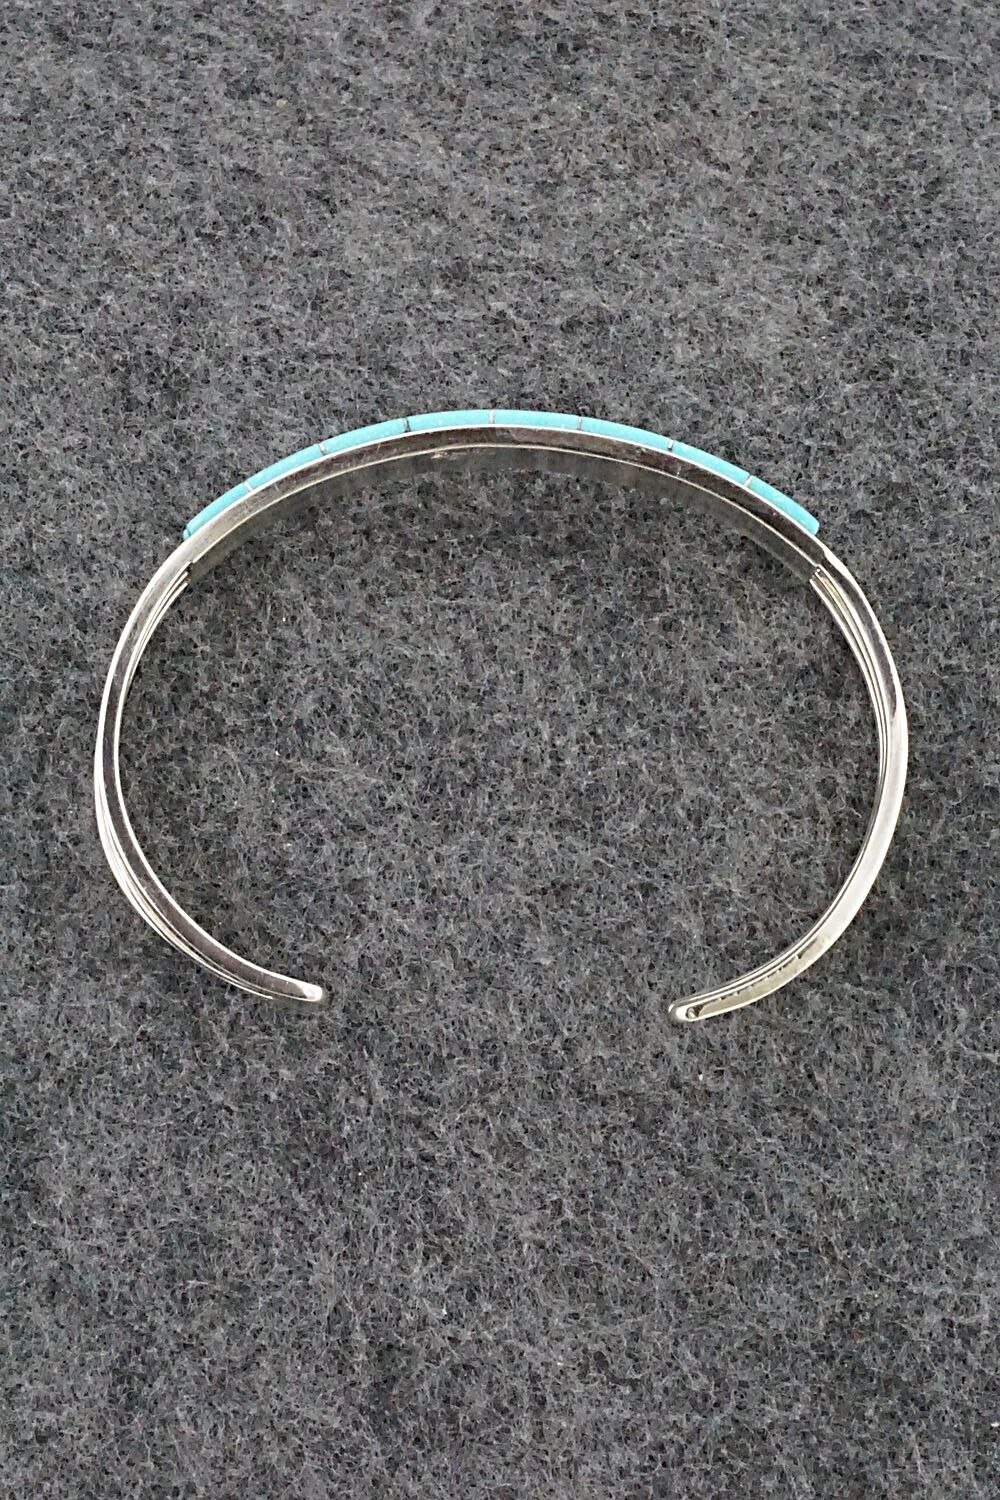 Turquoise & Sterling Silver Bracelet - Anson Wallace